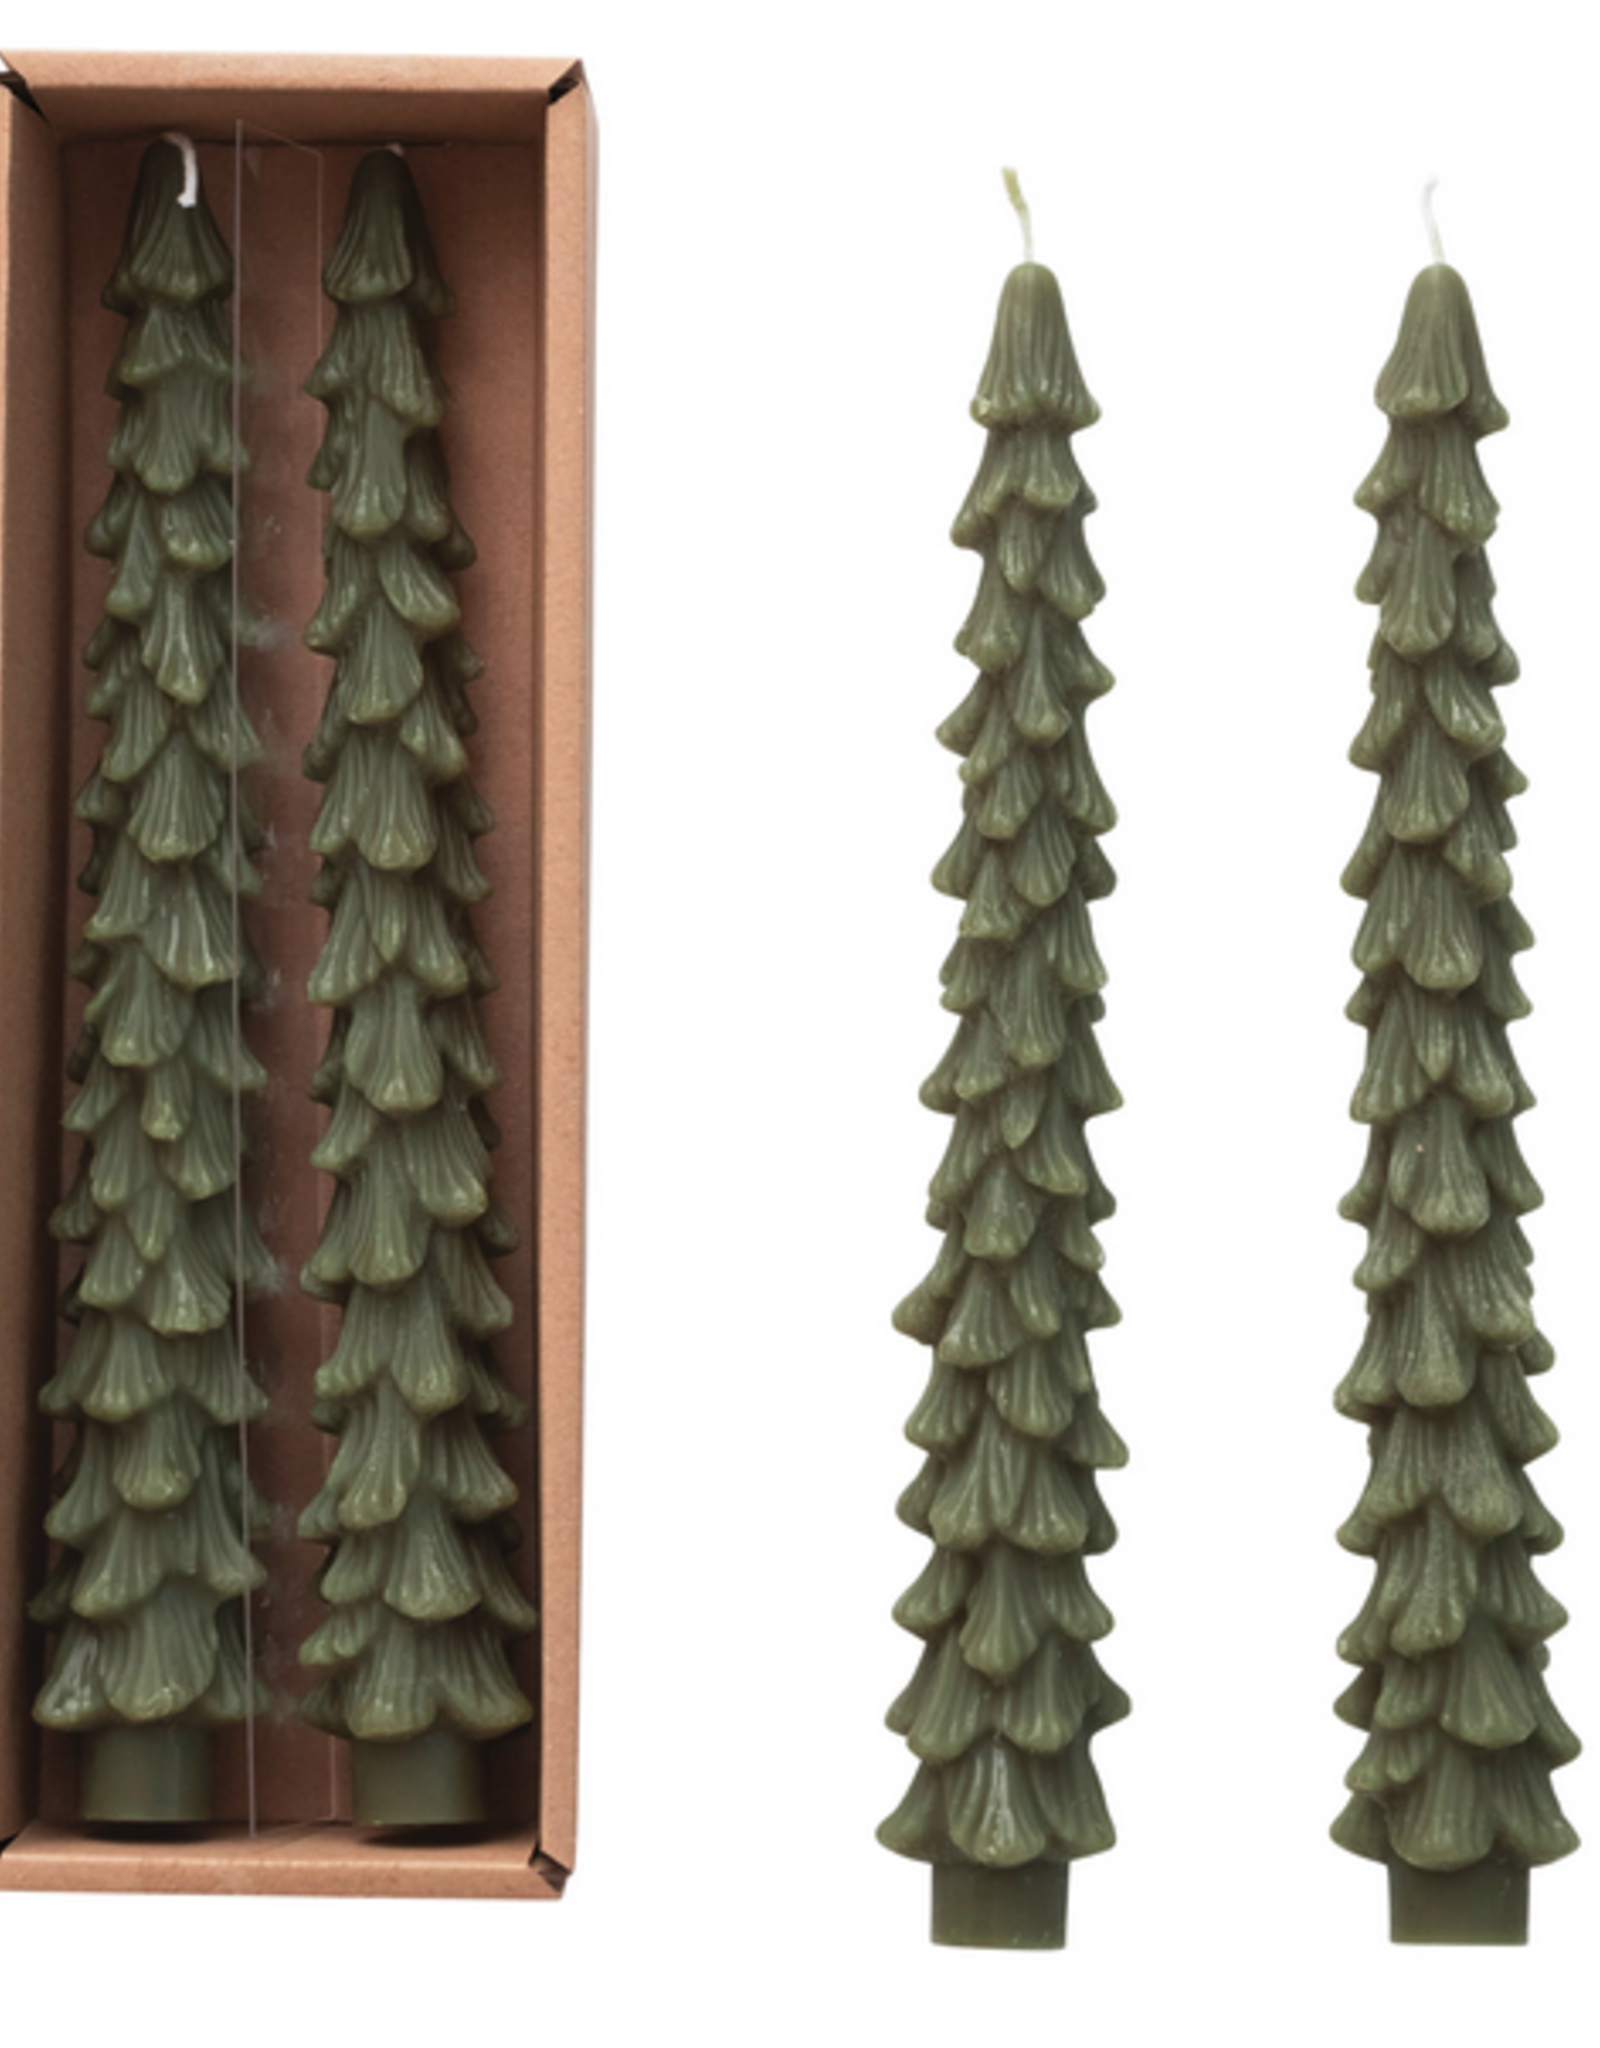 Large Evergreen Tree Shaped Taper Candles H10" 10 Hours - Box of 2